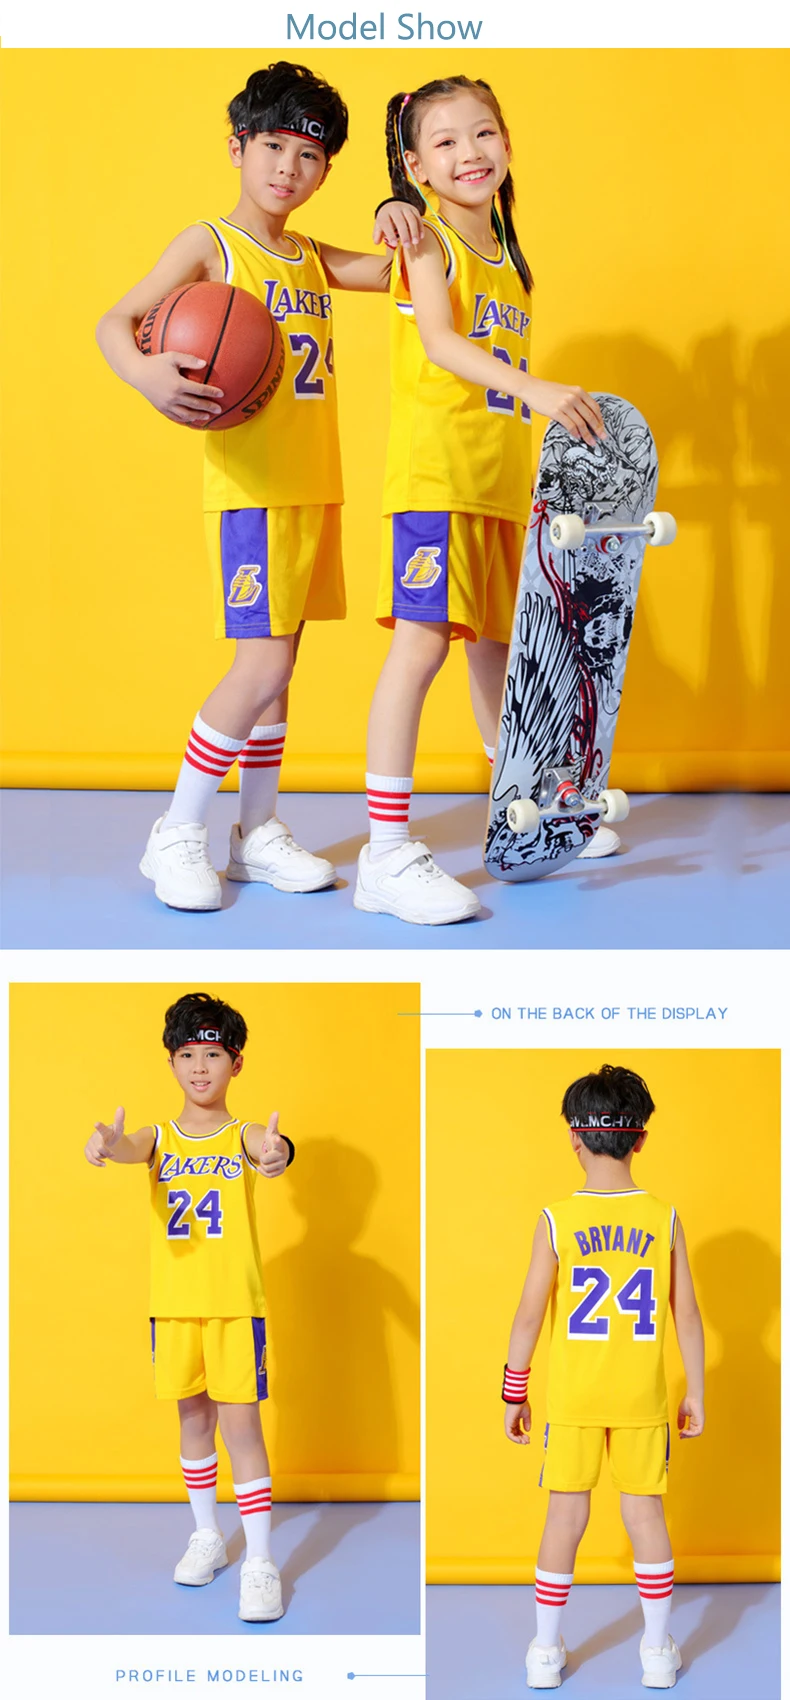  CABCG Children's Sports Basketball wear, Summer Suit, Tank top,  Little Boy's Breathable Sweat-Absorbing Jersey 160【建议160cm以下】 黑金24 :  Clothing, Shoes & Jewelry